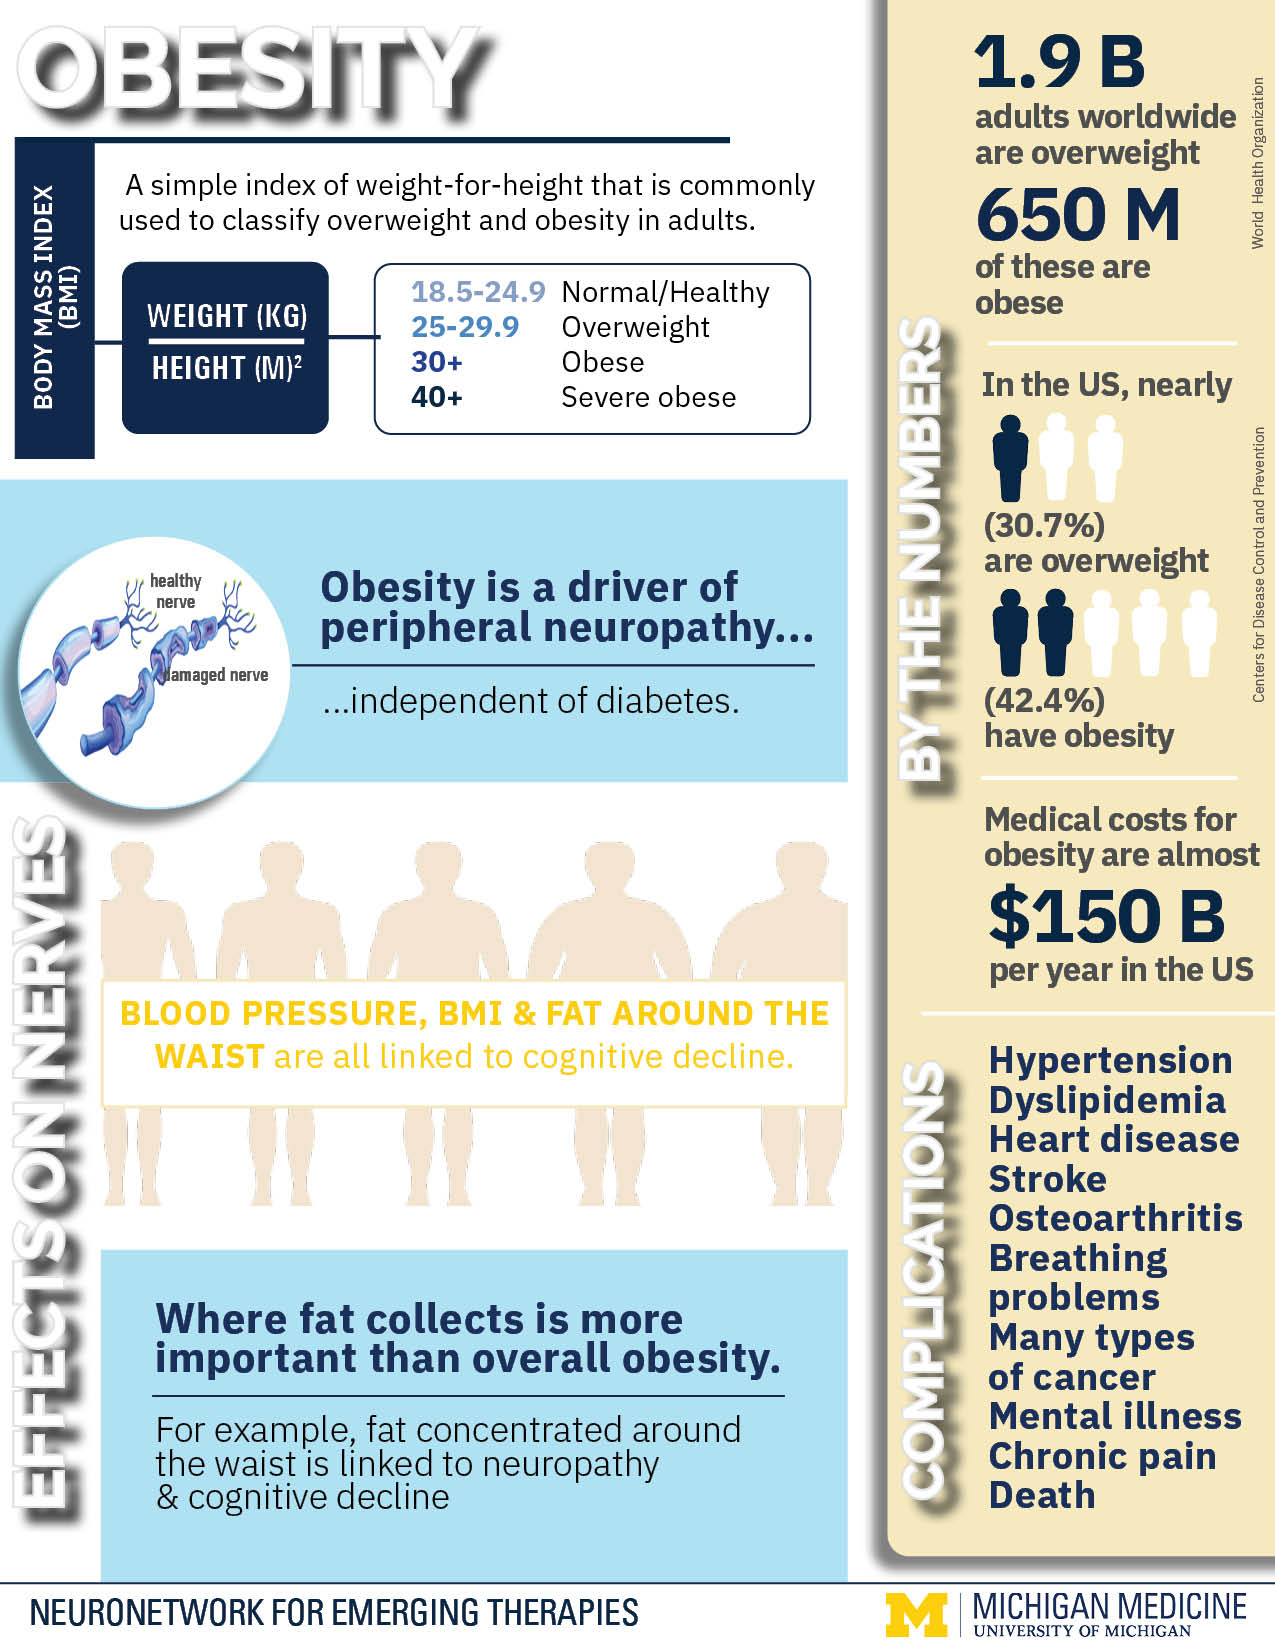 NeuroNetwork for Emerging Therapies obesity infographic